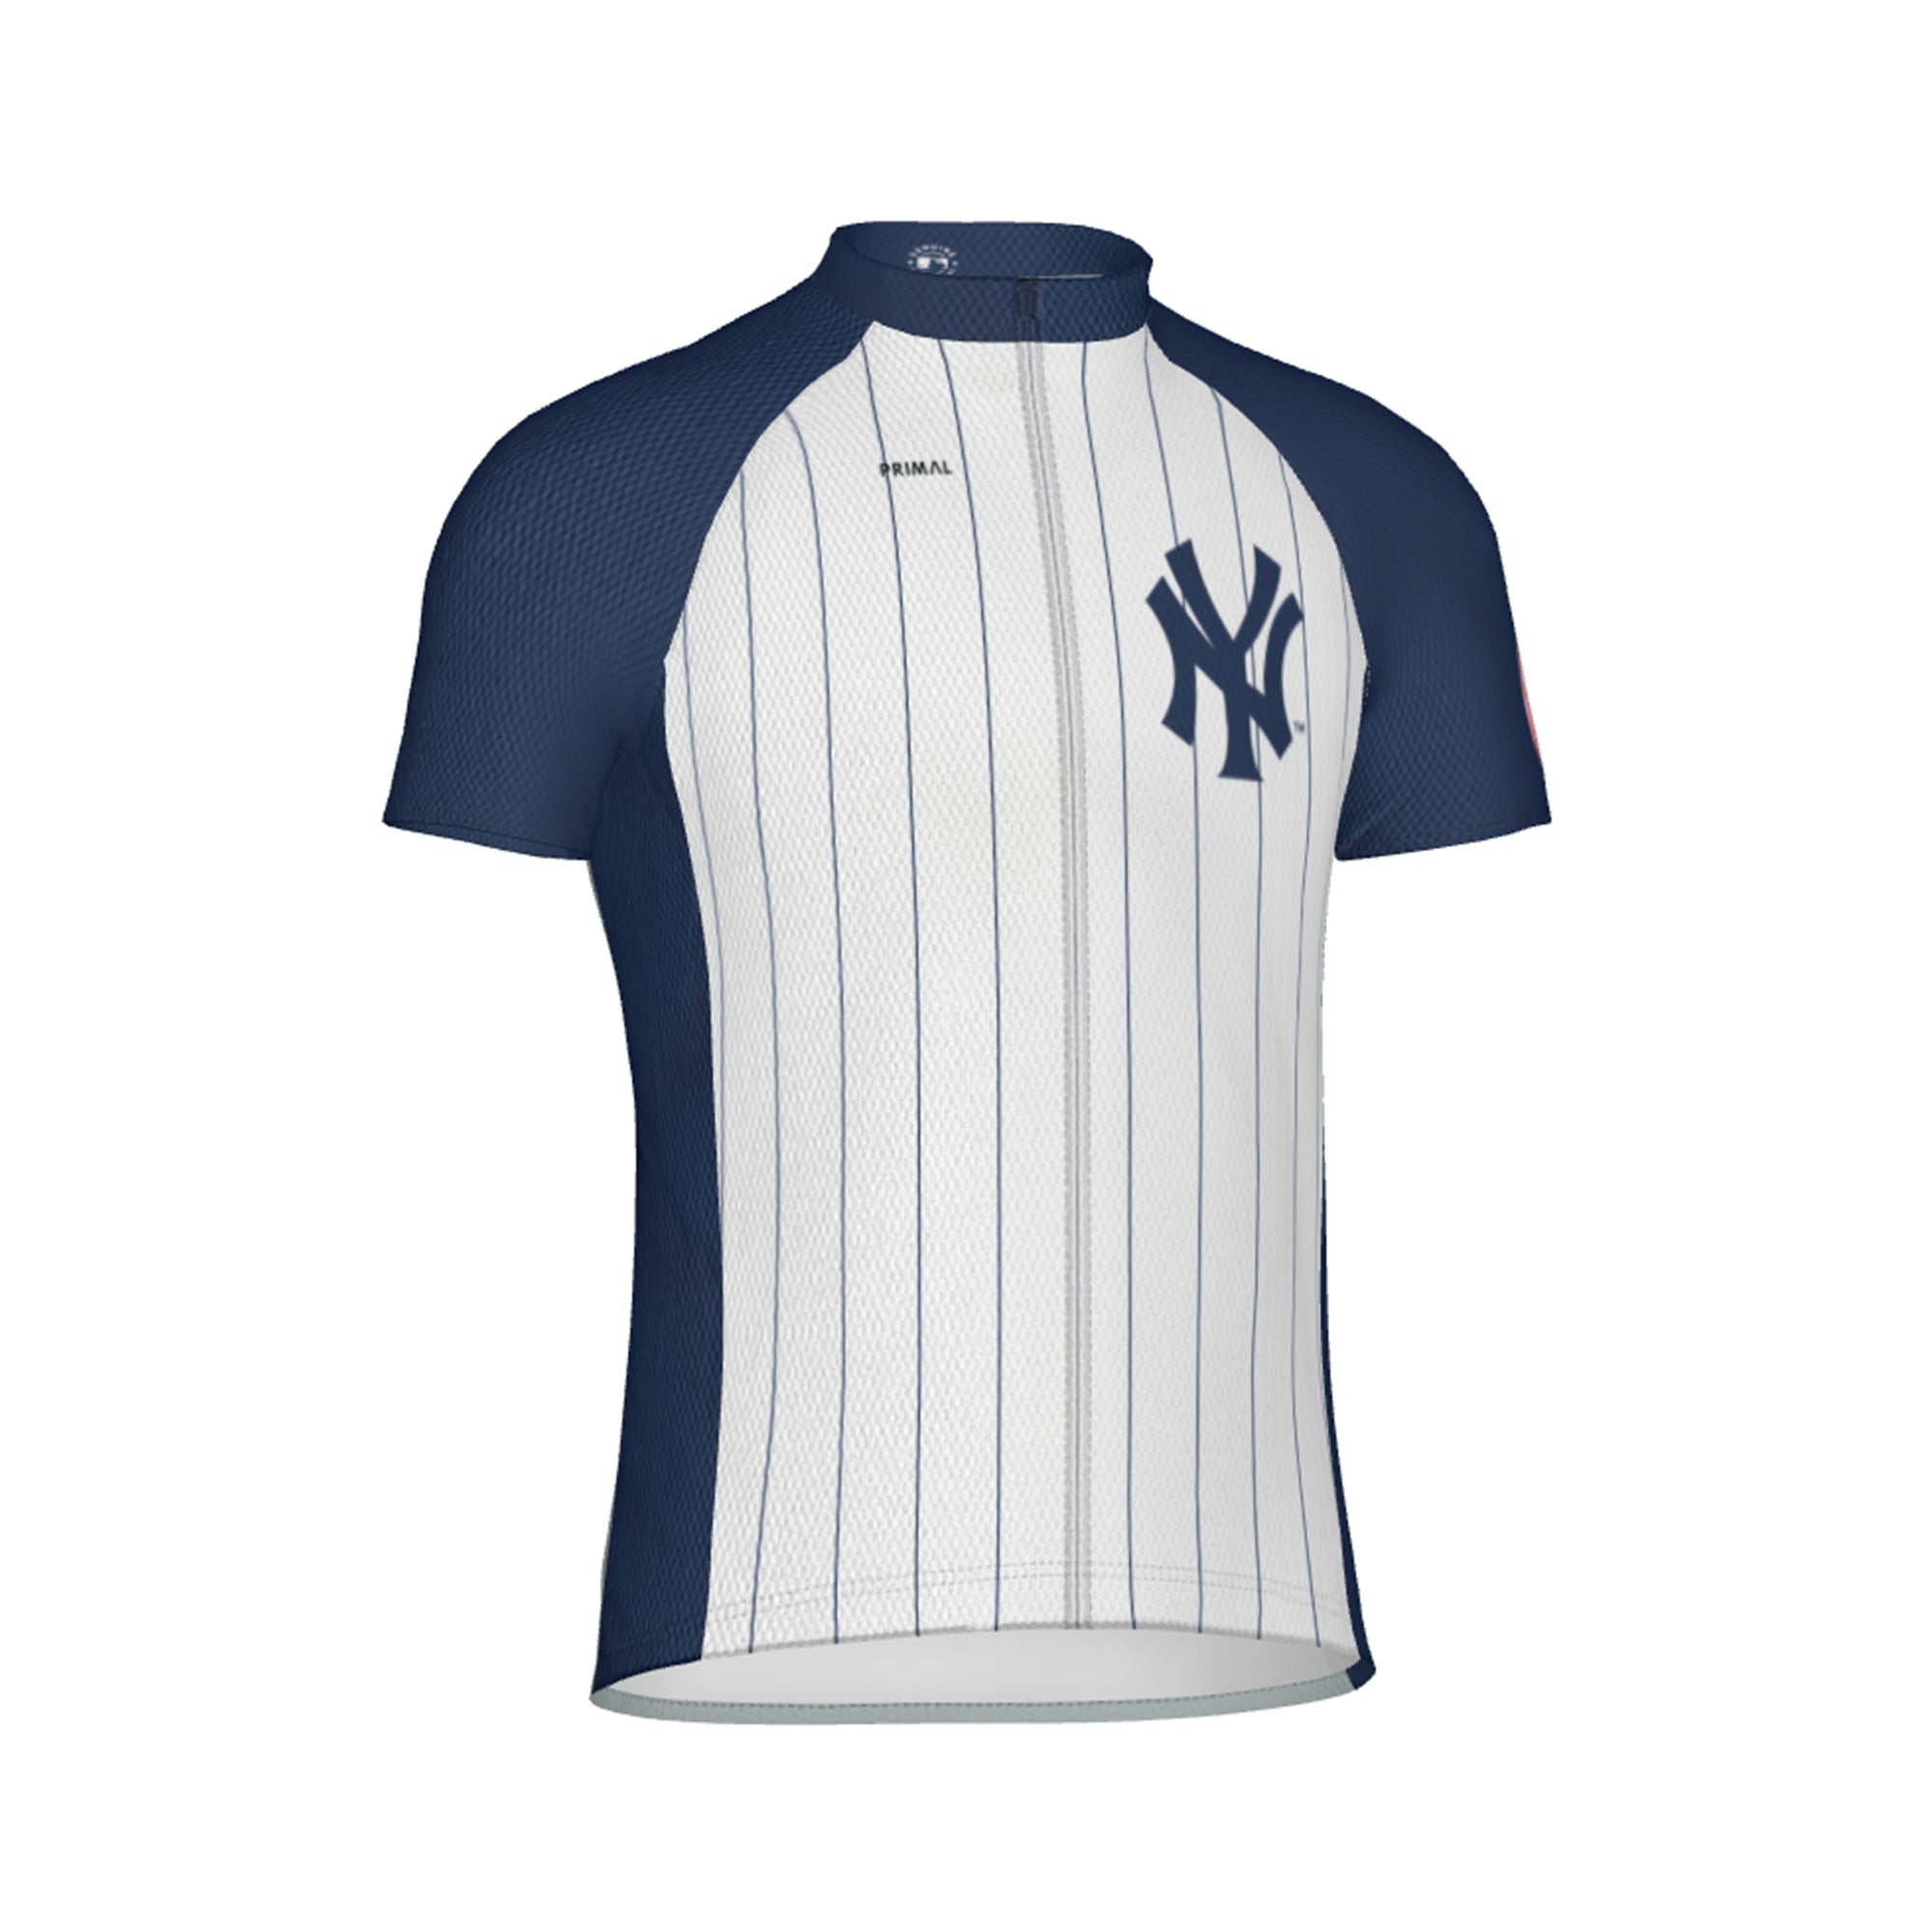 yankees special jersey